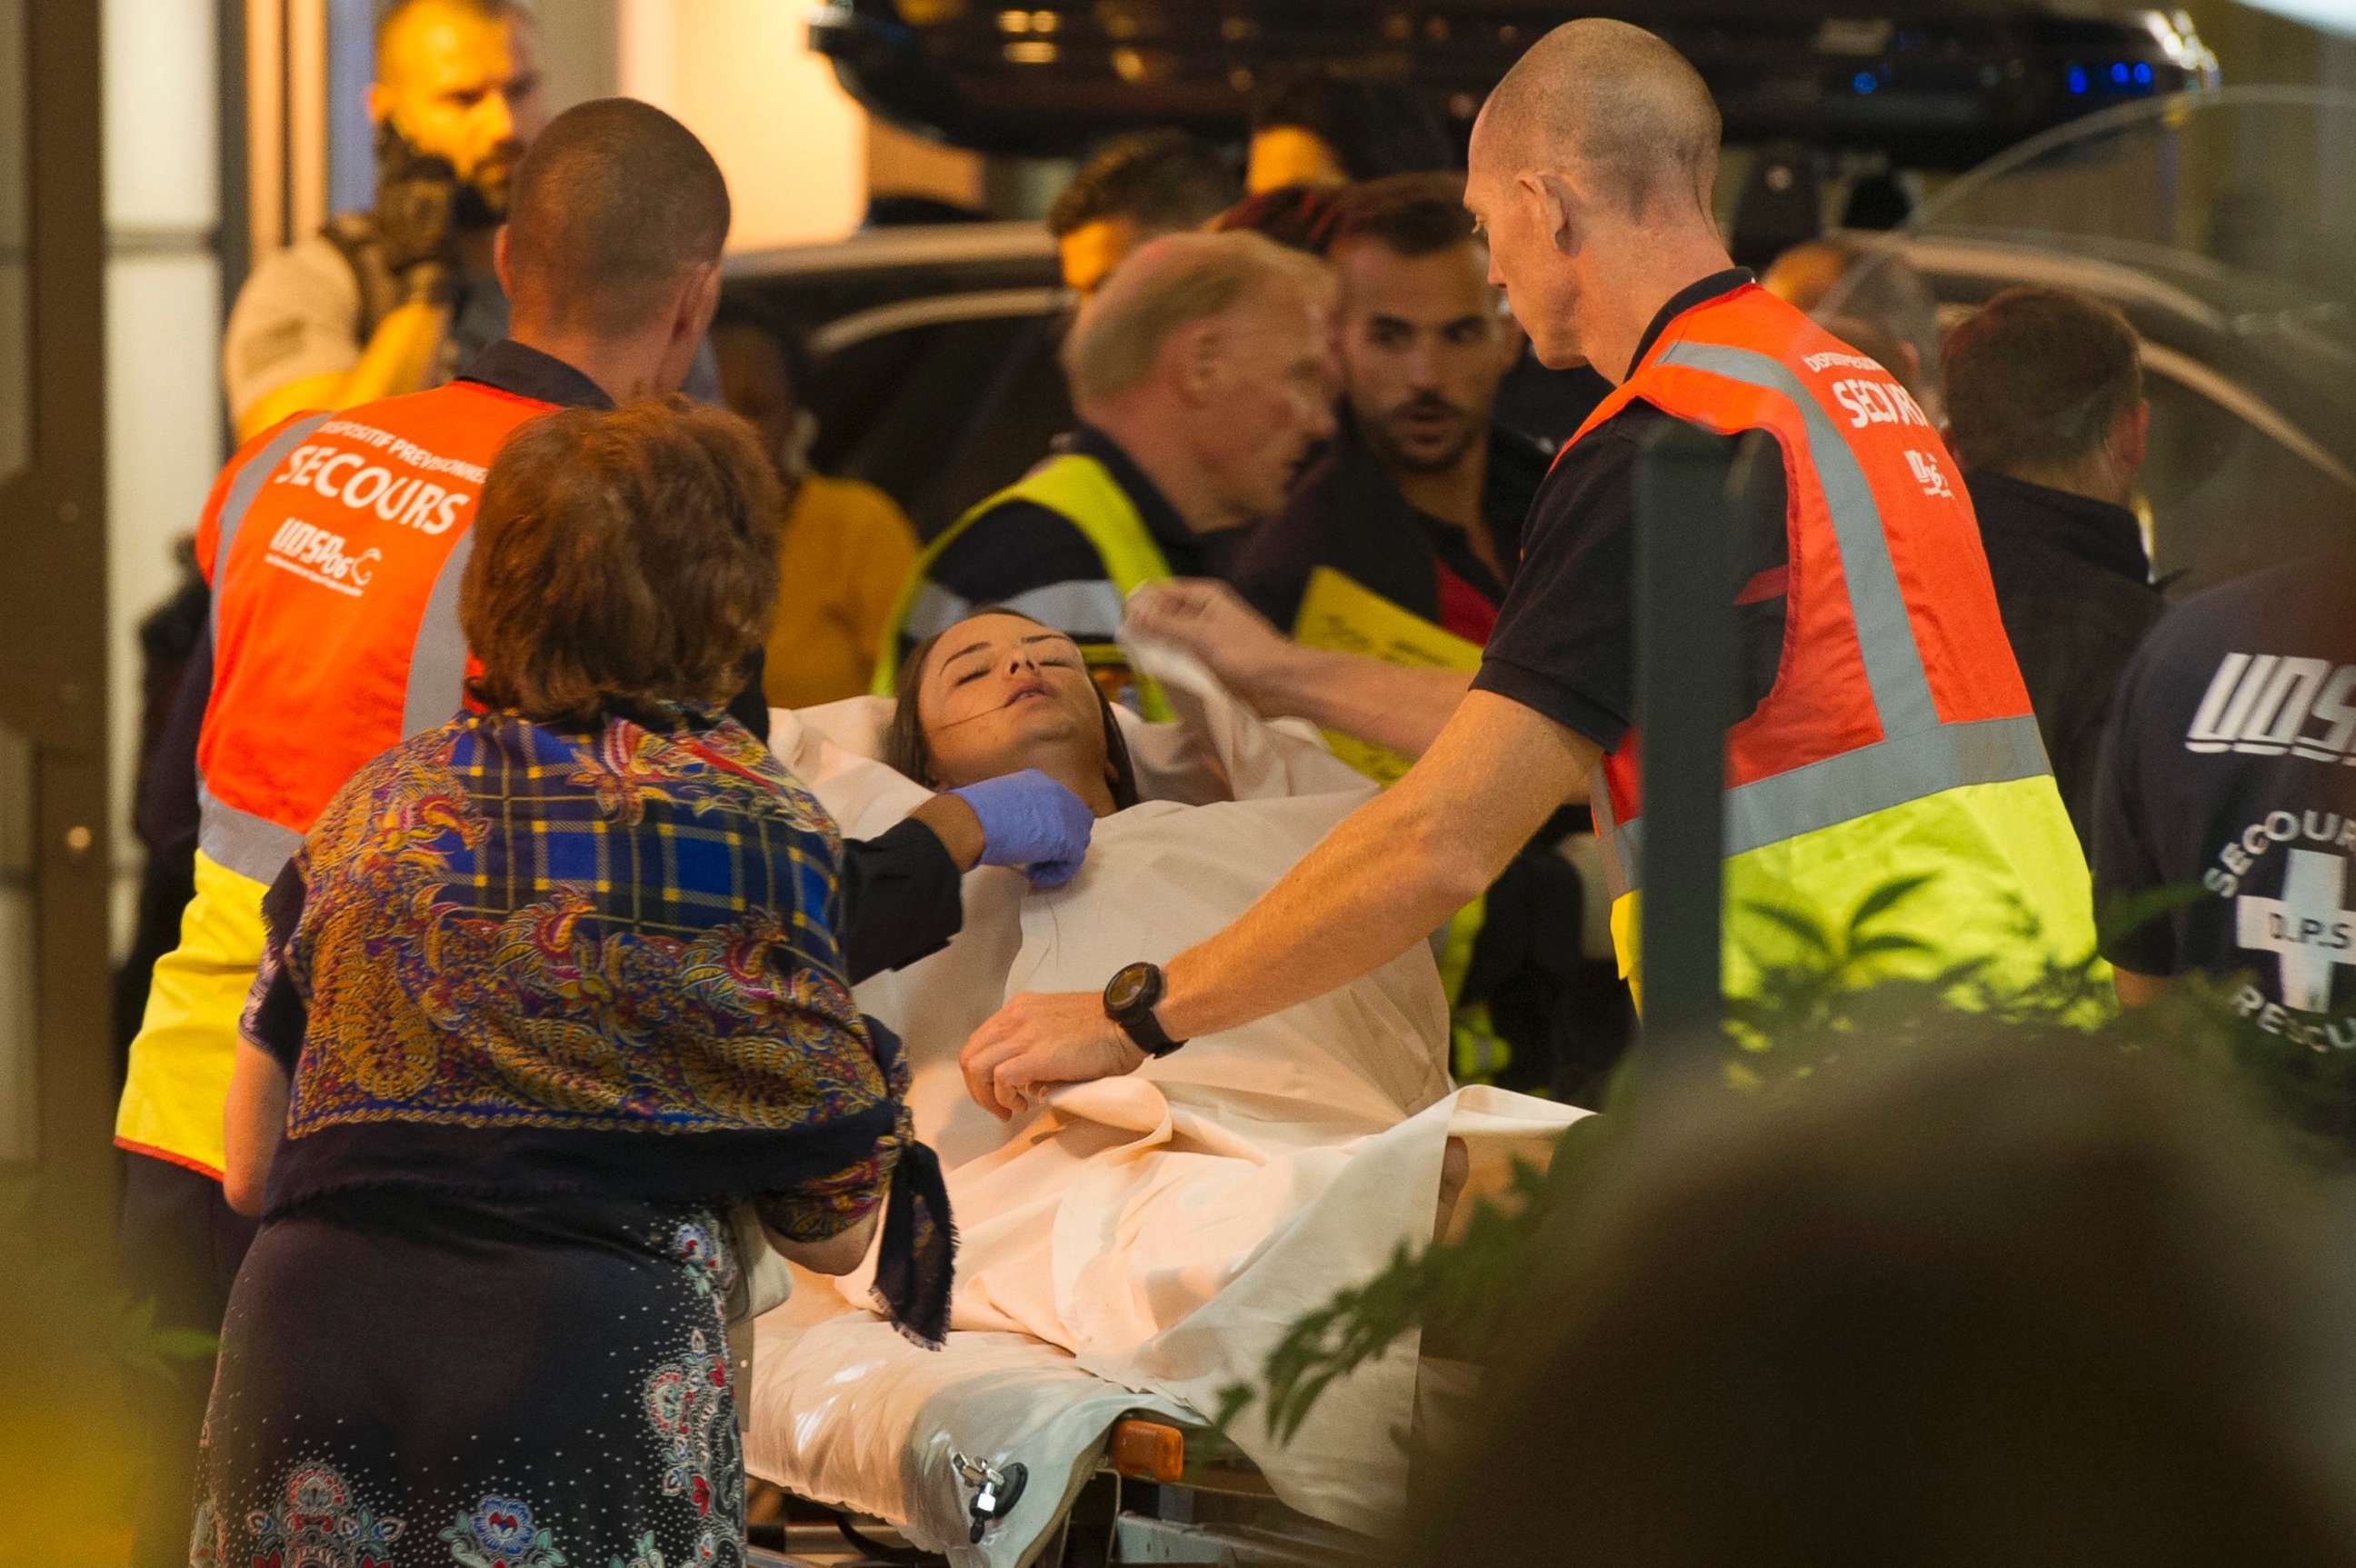 PHOTO: An emergency team assists wounded people as they evacuate from the scene where a truck crashed into the crowd during the Bastille Day celebrations in Nice, France, July 14, 2016